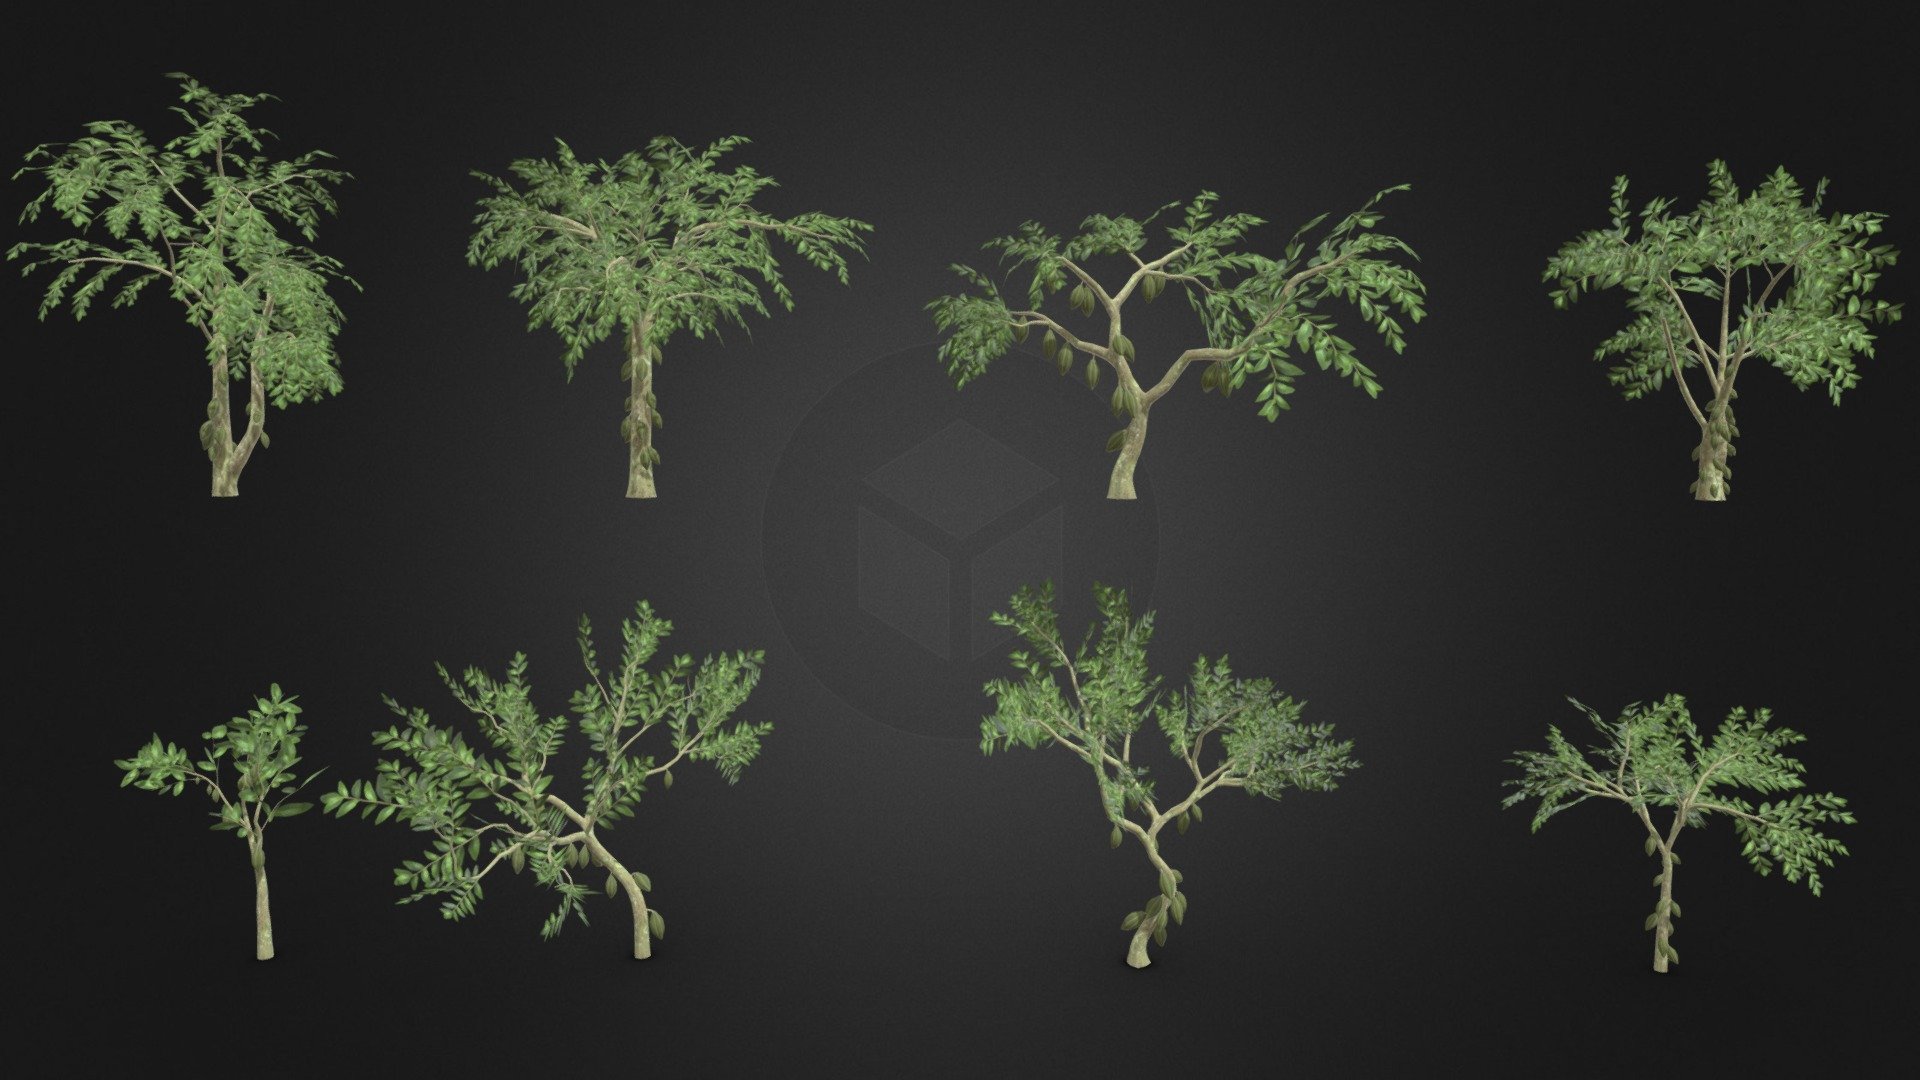 This is a 3D low poly model of a Cacao tree pack. This pack contains 4 models that you can use in your projects.

Info:

Theobroma cacao is a small evergreen tree in the family Malvaceae. Its seeds, cocoa beans, are used to make chocolate liquor, cocoa solids, cocoa butter, and chocolate. Native to the tropics of the Americas, the largest producer of cocoa beans in 2018 was Ivory Coast, at 2.2 million tons 3d model